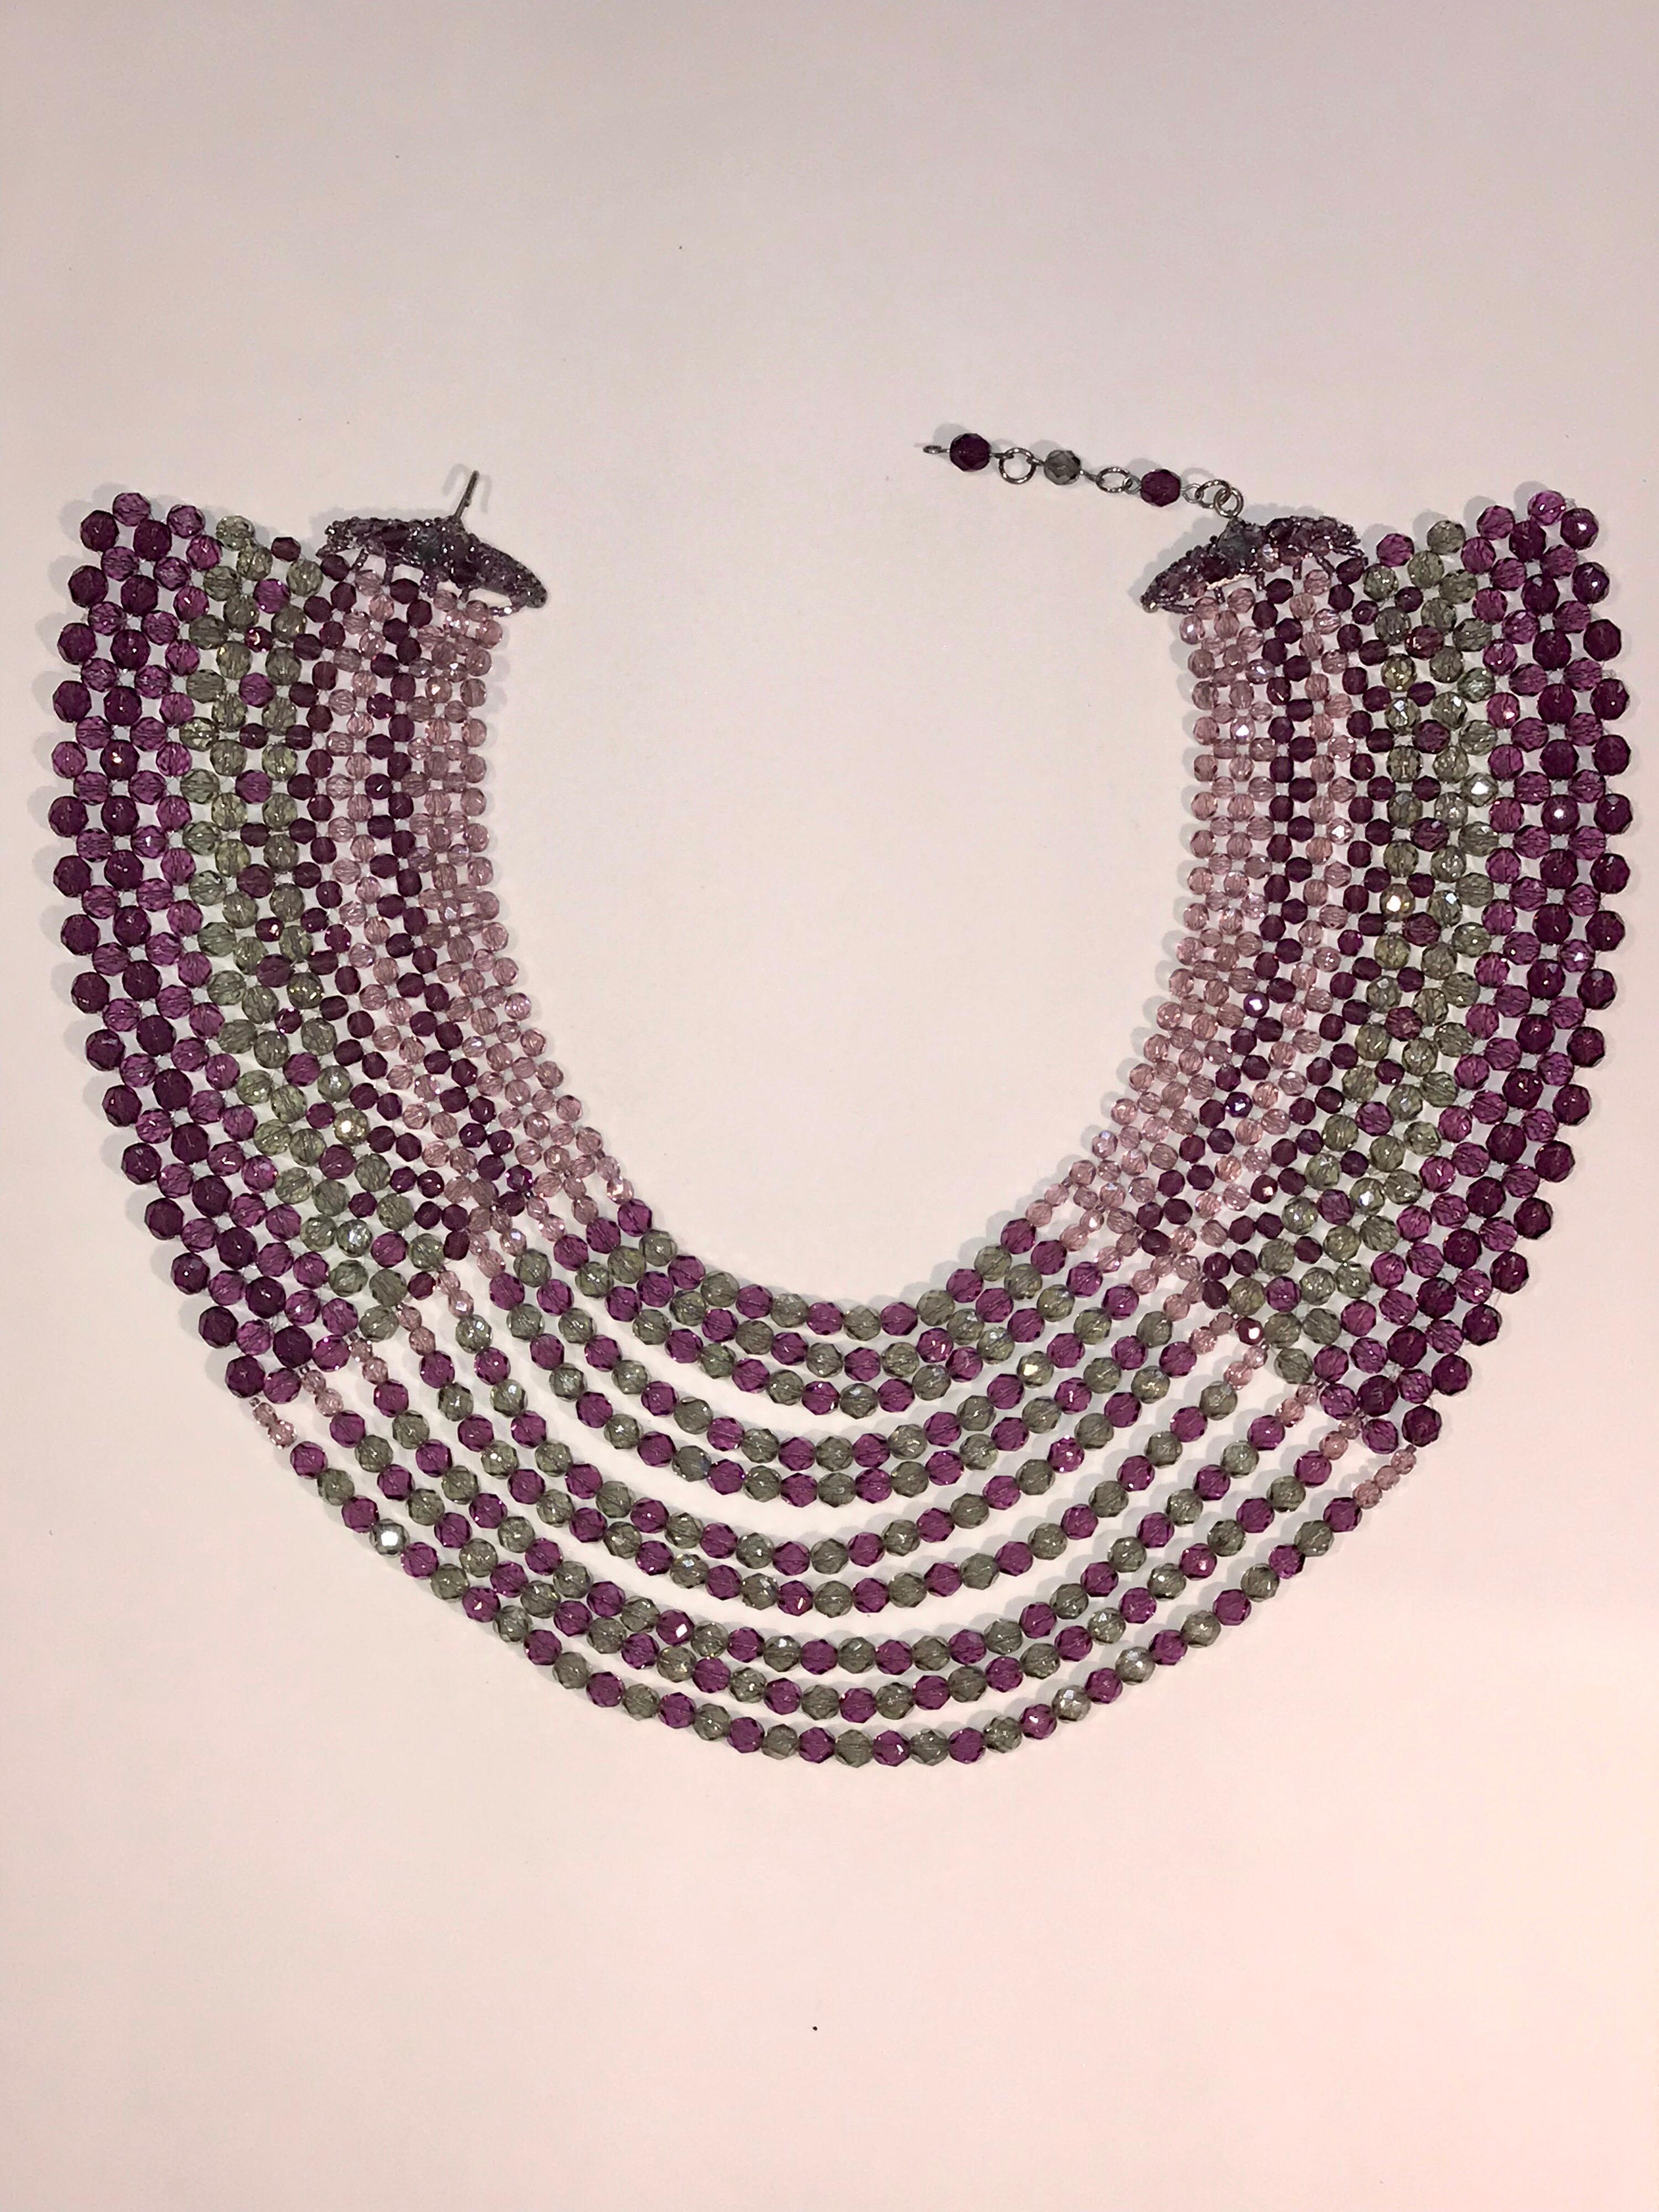 An impressive late 1960s to mid 1970s faceted crystal bead collar necklace by famous jewelry company Coppola e Toppo. This necklace is 3.75 inches of woven and swag pale purple, sage green and amethyst color crystal beads in three size beads. The